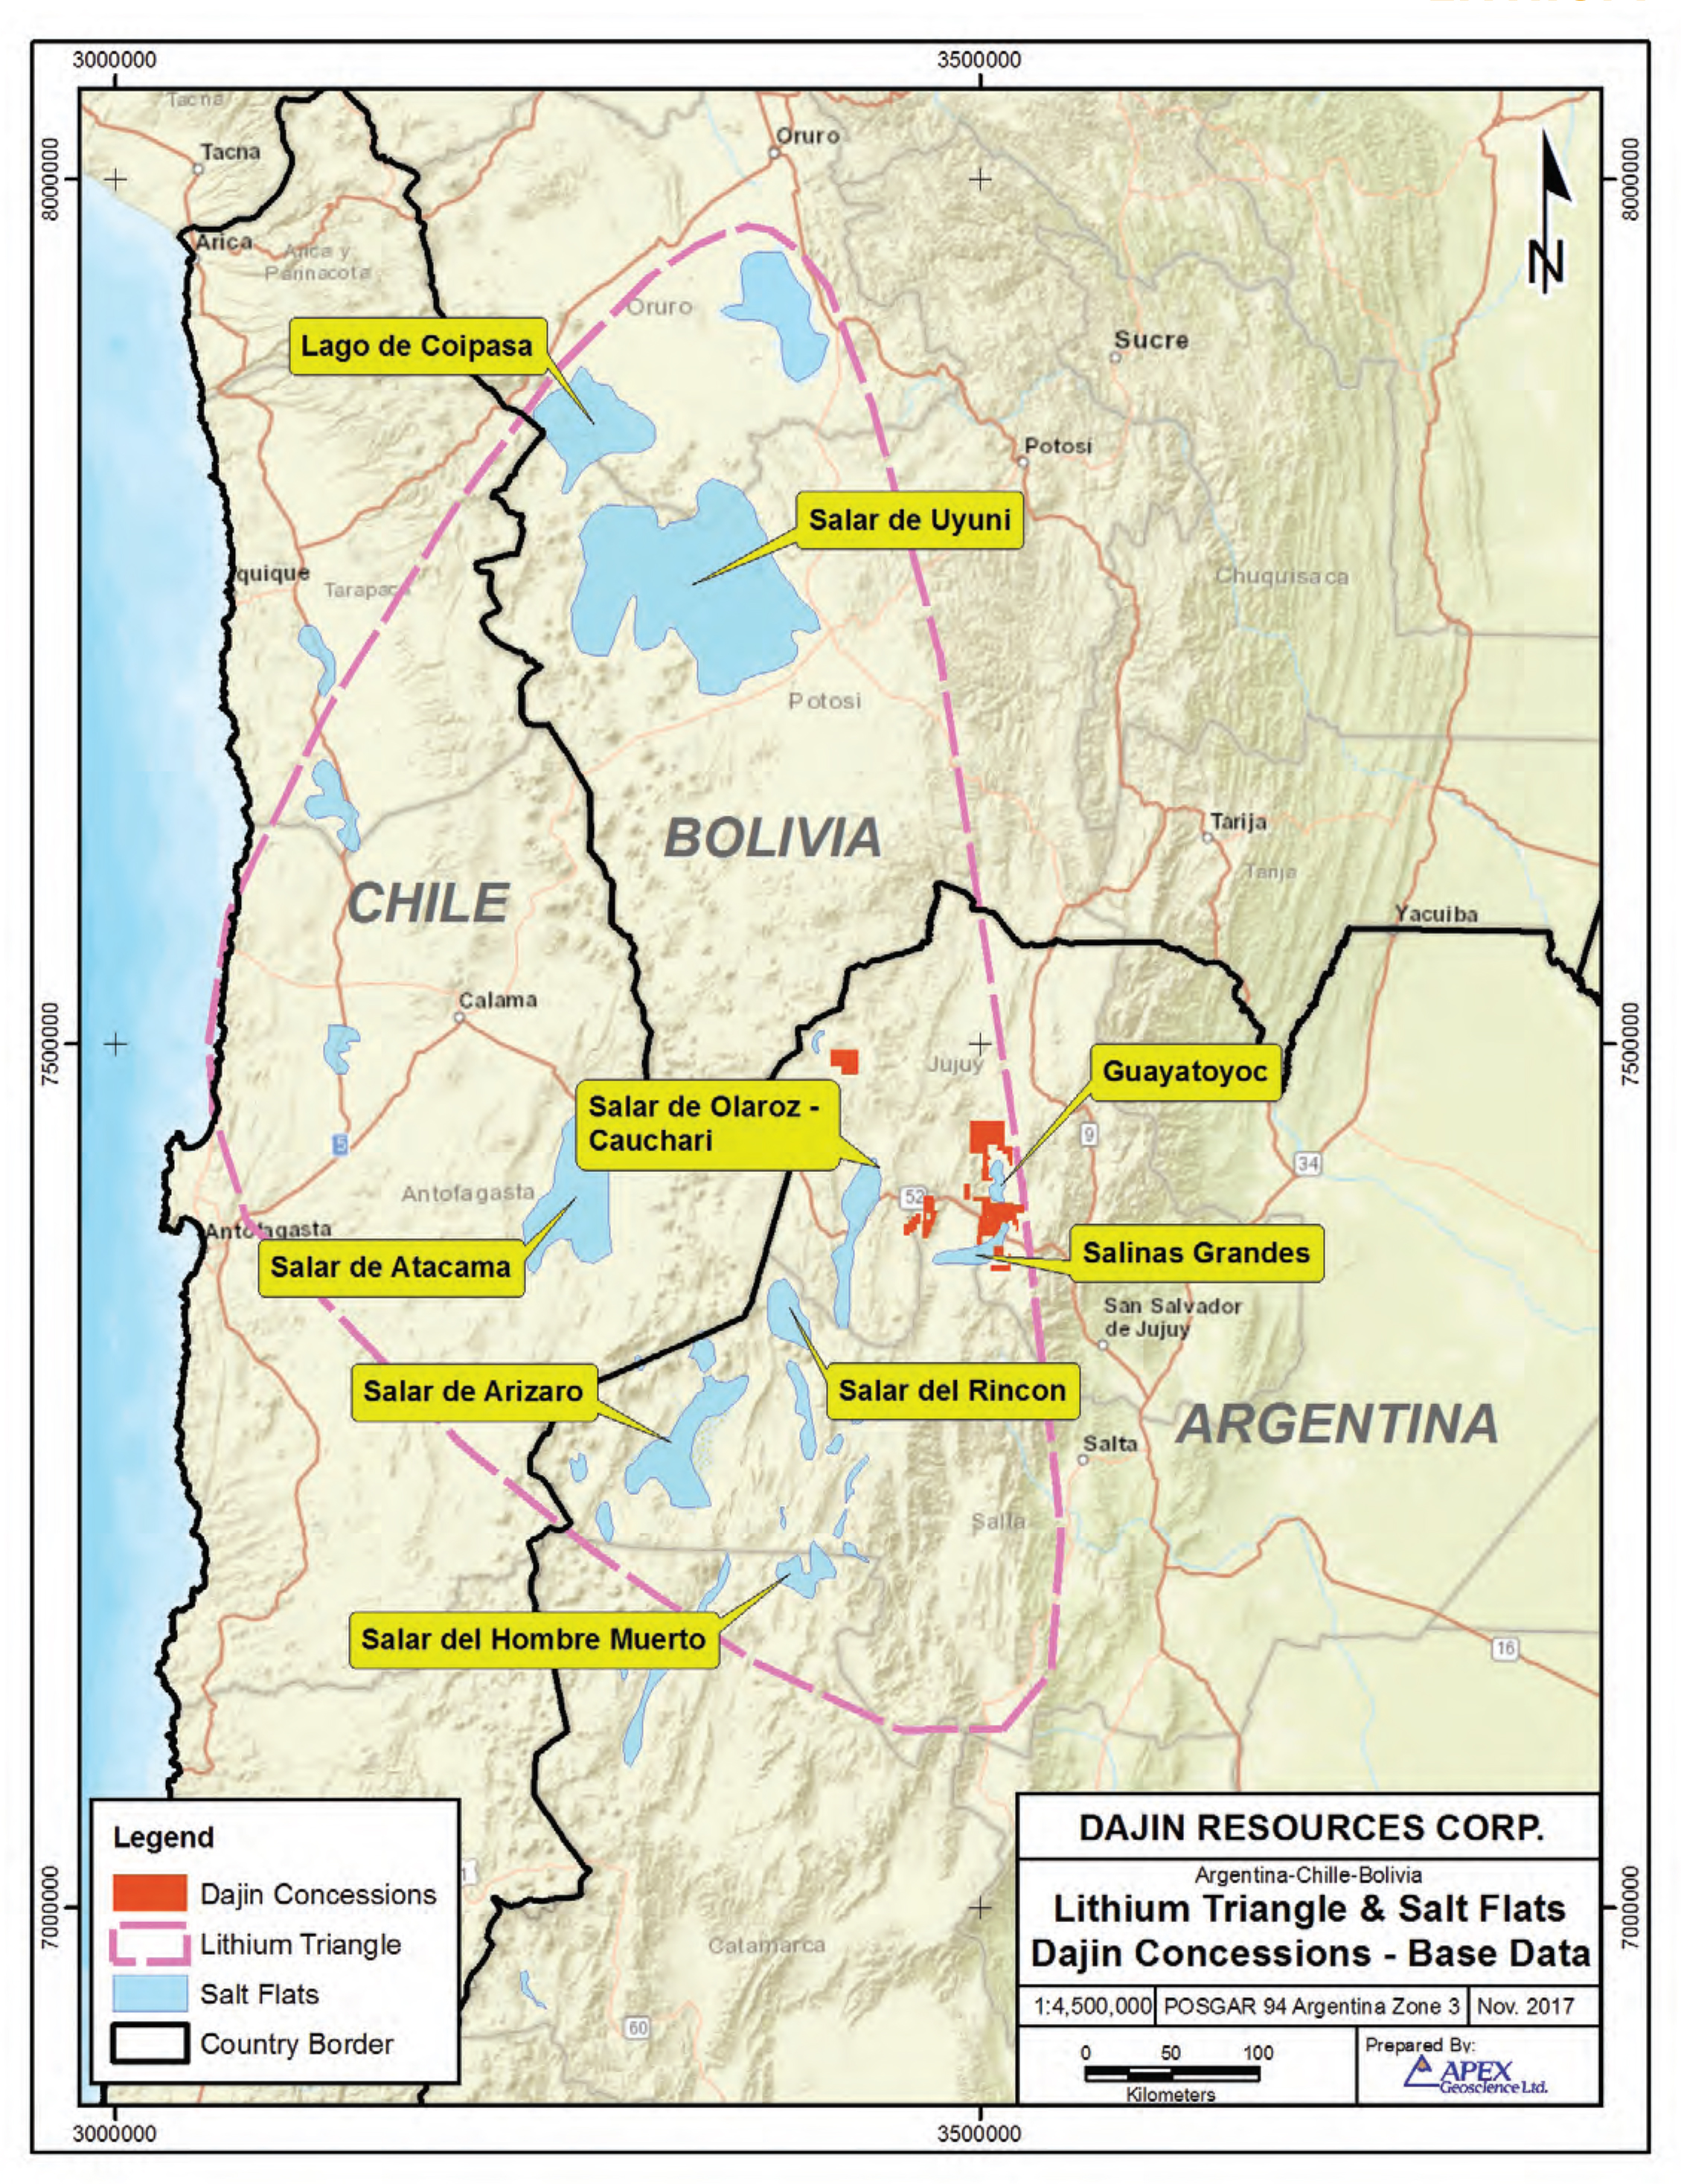 Lithium in Chile, Argentina, and Bolivia triangle in South America from AIS 